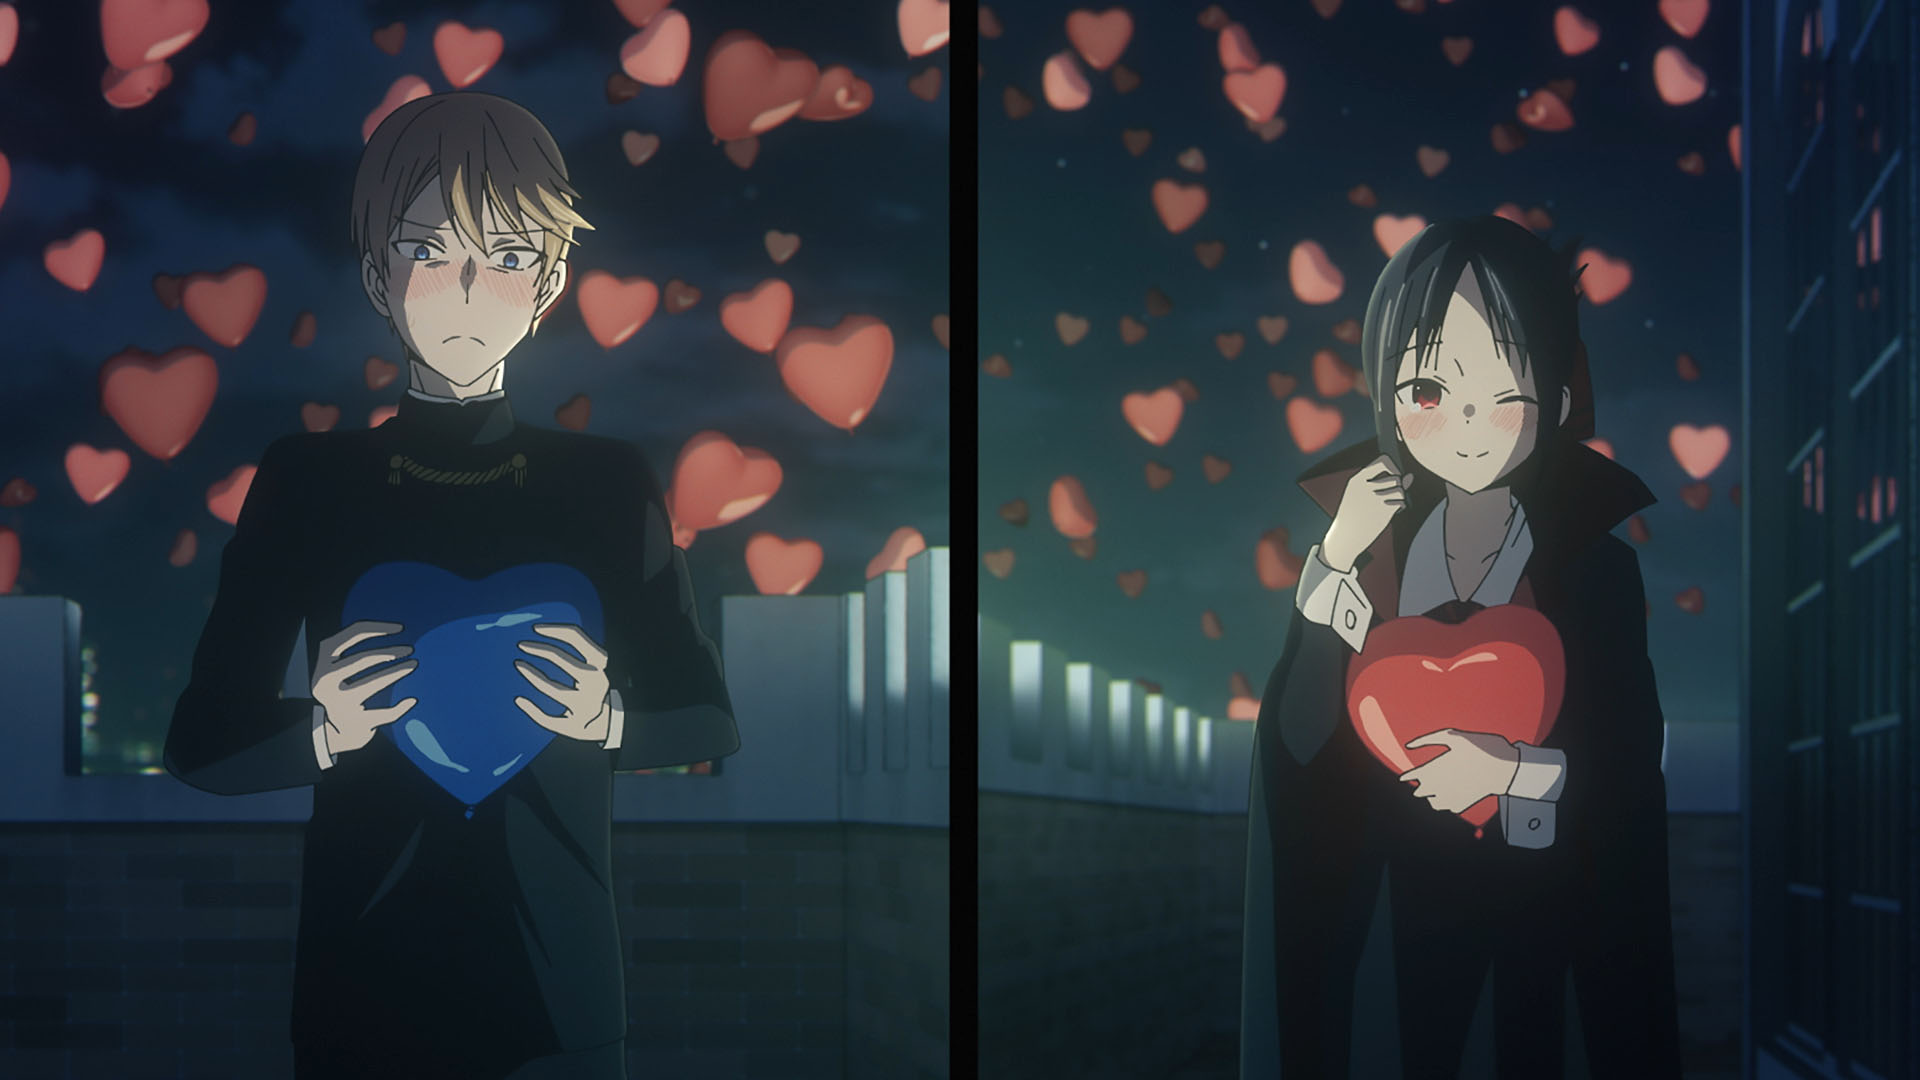 Crunchyroll - Kaguya-sama: Love is War -The First Kiss That Never Ends-  Heads to . Theaters in February 2023